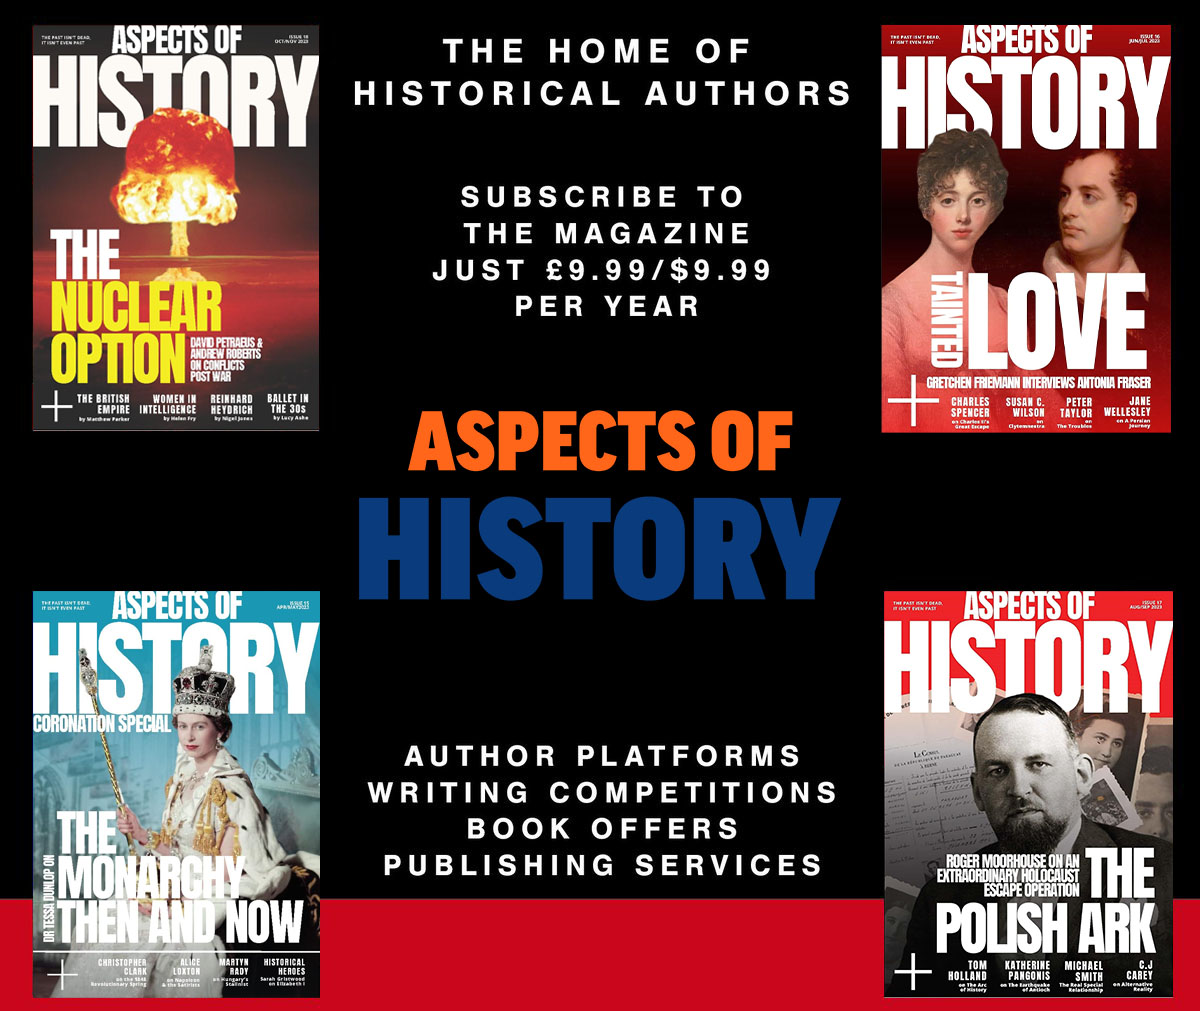 Subscribe to Aspects of History For just £9.99 per year aspectsofhistory.com/product/subscr… Receive 6 Issues Full of articles, interviews, short stories, book reviews #historylovers #twitterstorians #historyteacher